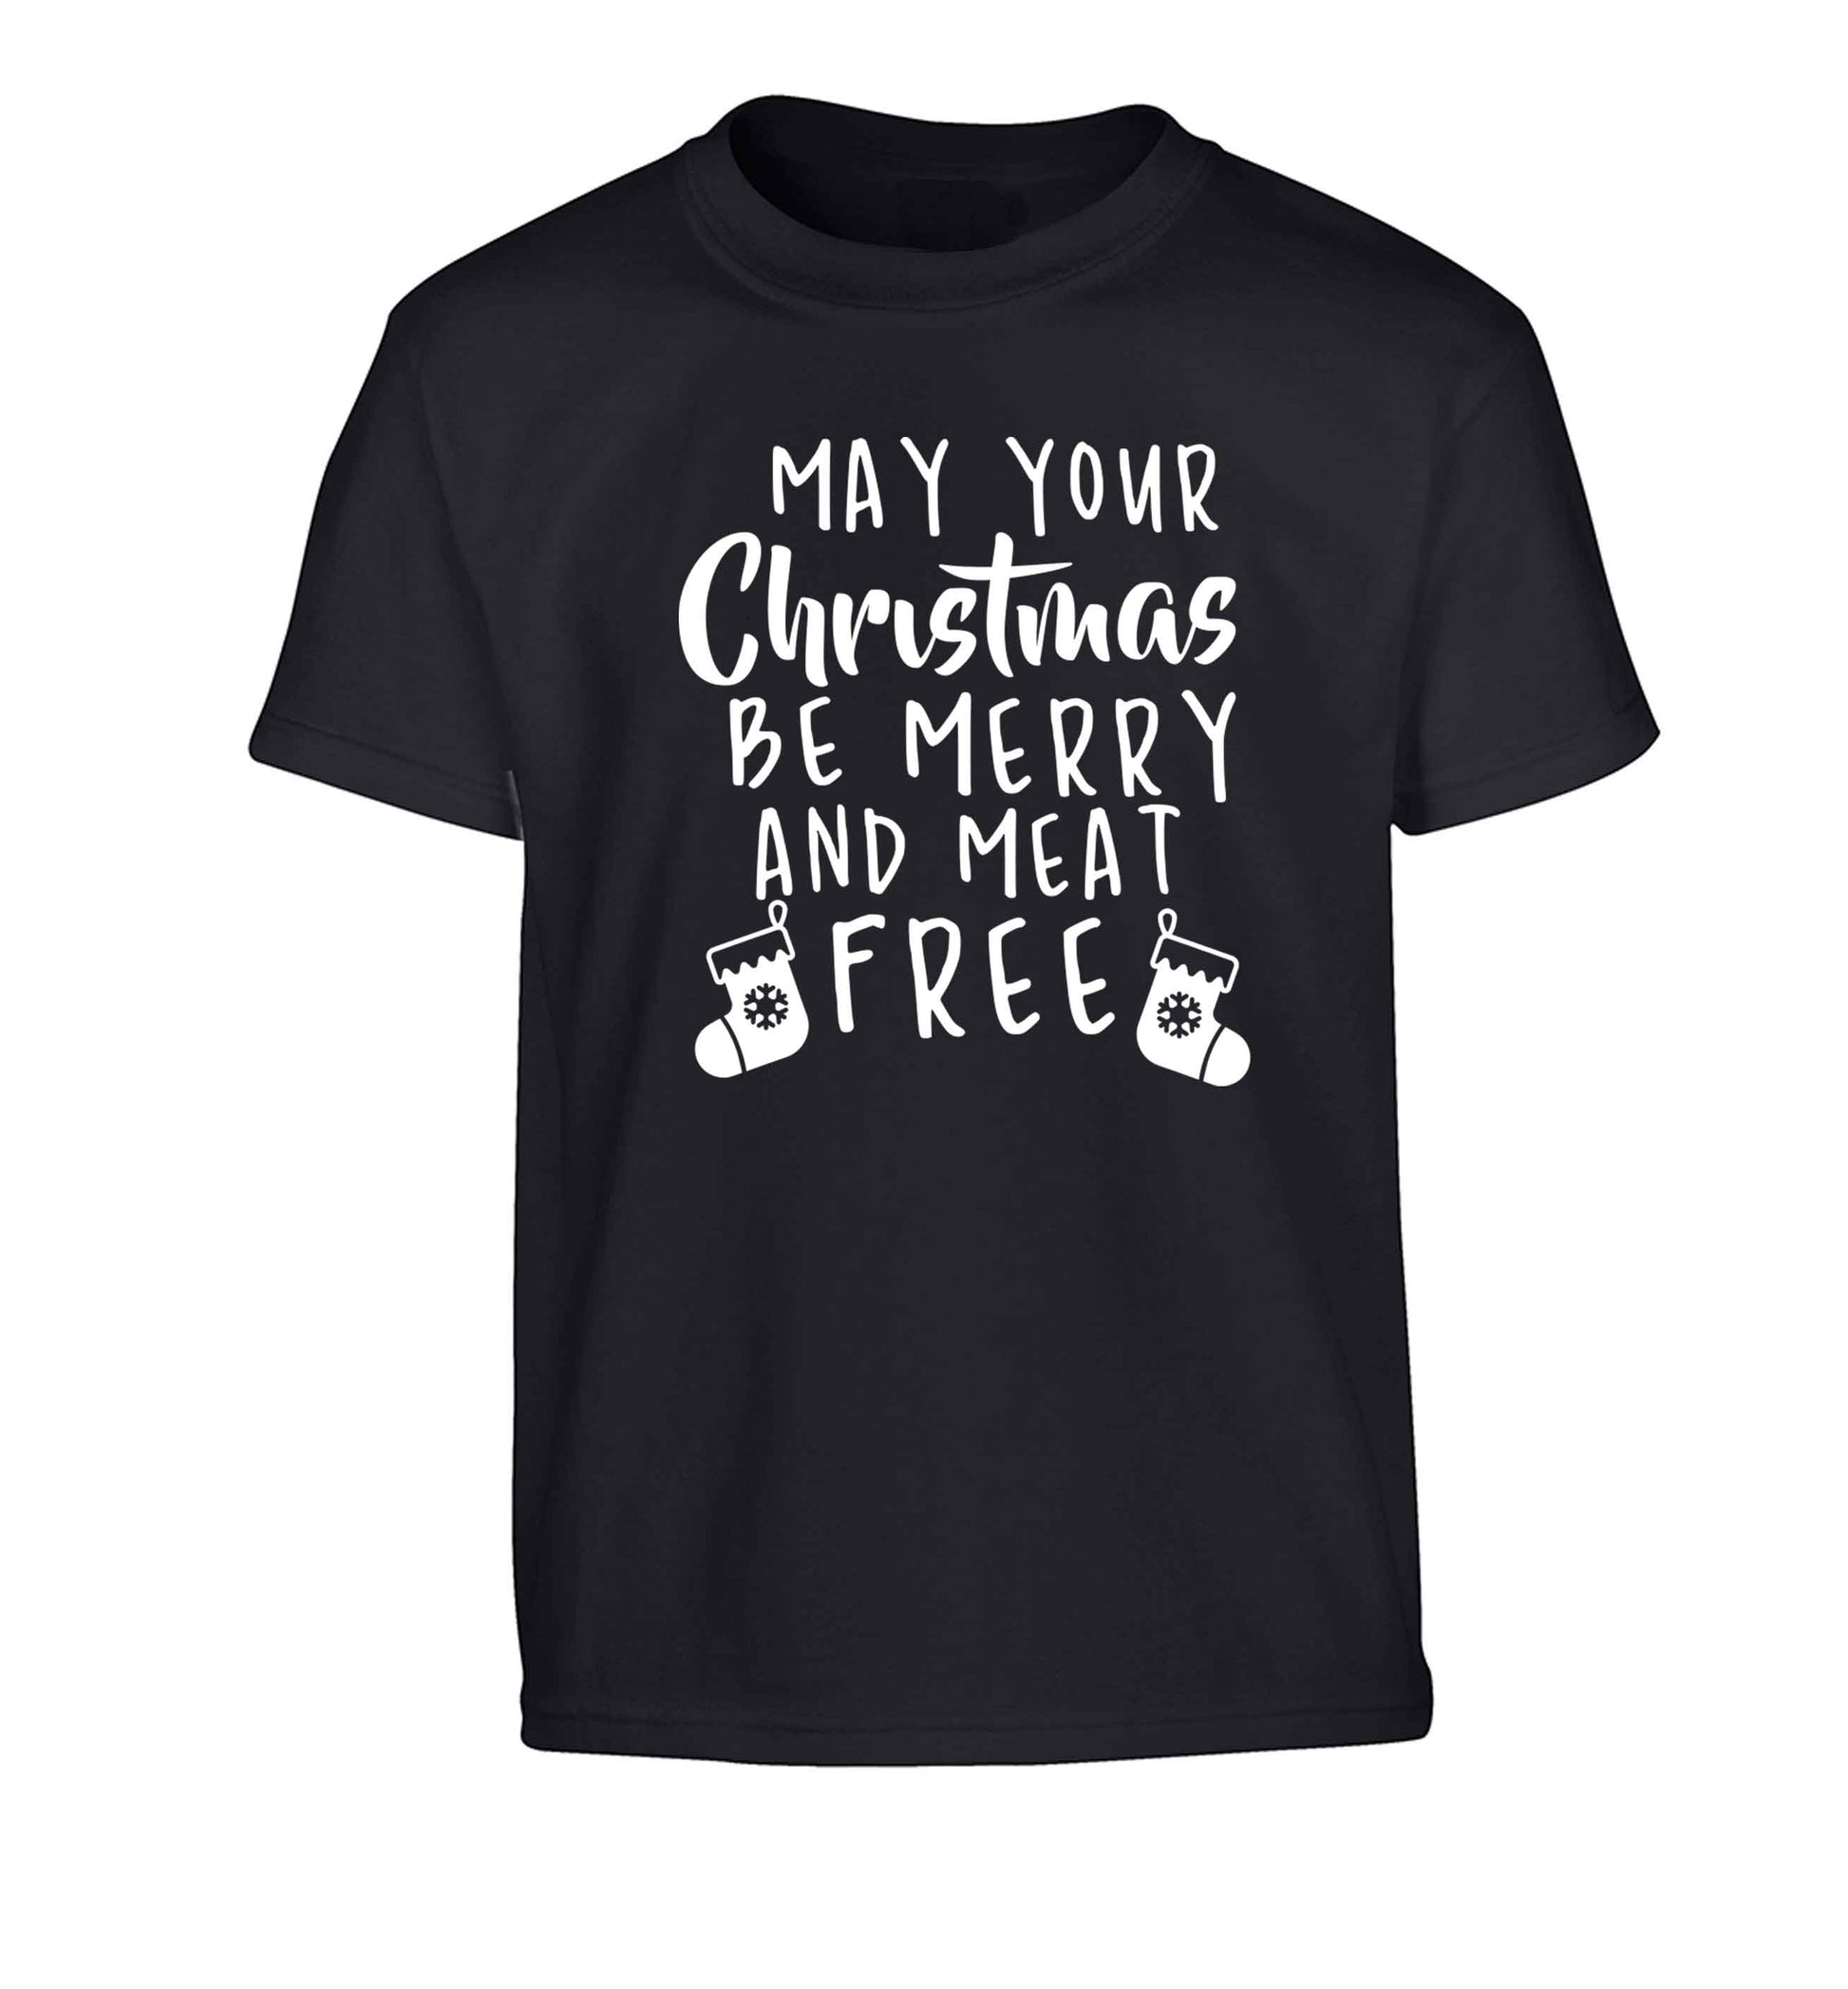 May your Christmas be merry and meat free Children's black Tshirt 12-13 Years